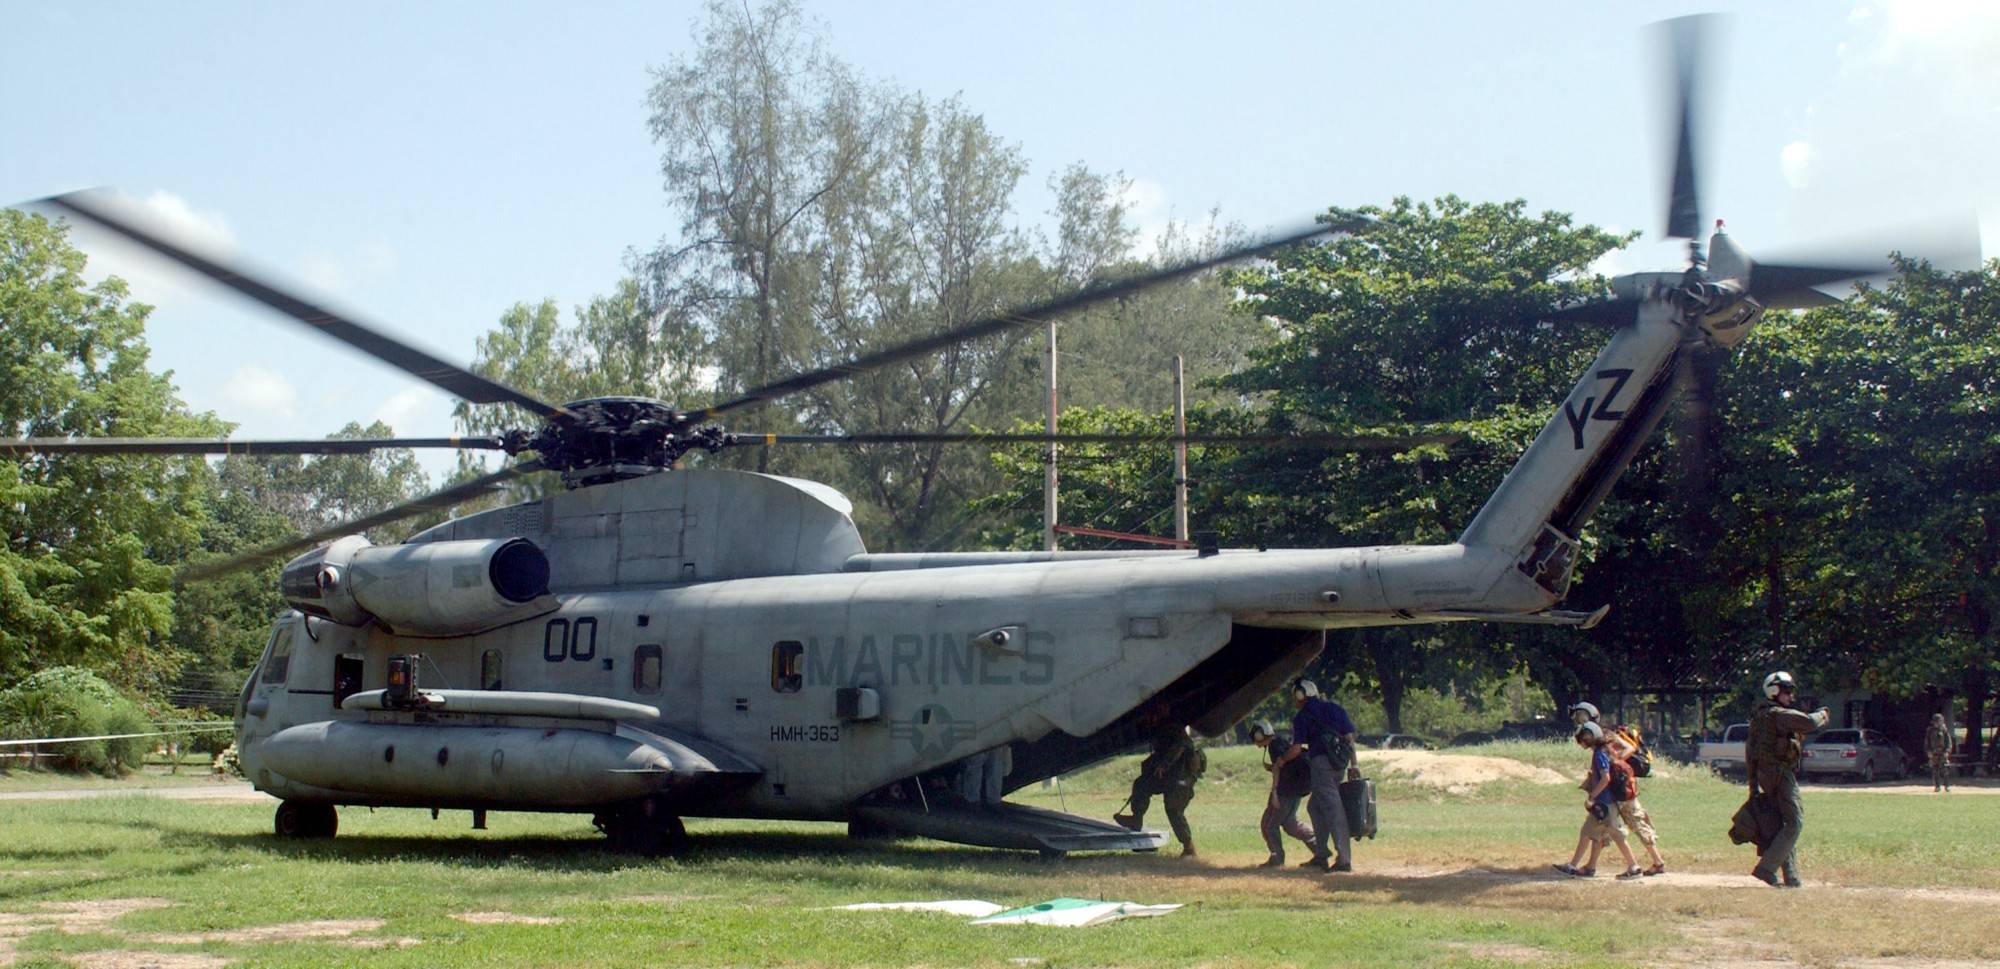 hmh-363 red lions marine heavy helicopter squadron usmc sikorsky ch-53d sea stallion 21 exercise cobra gold thailand